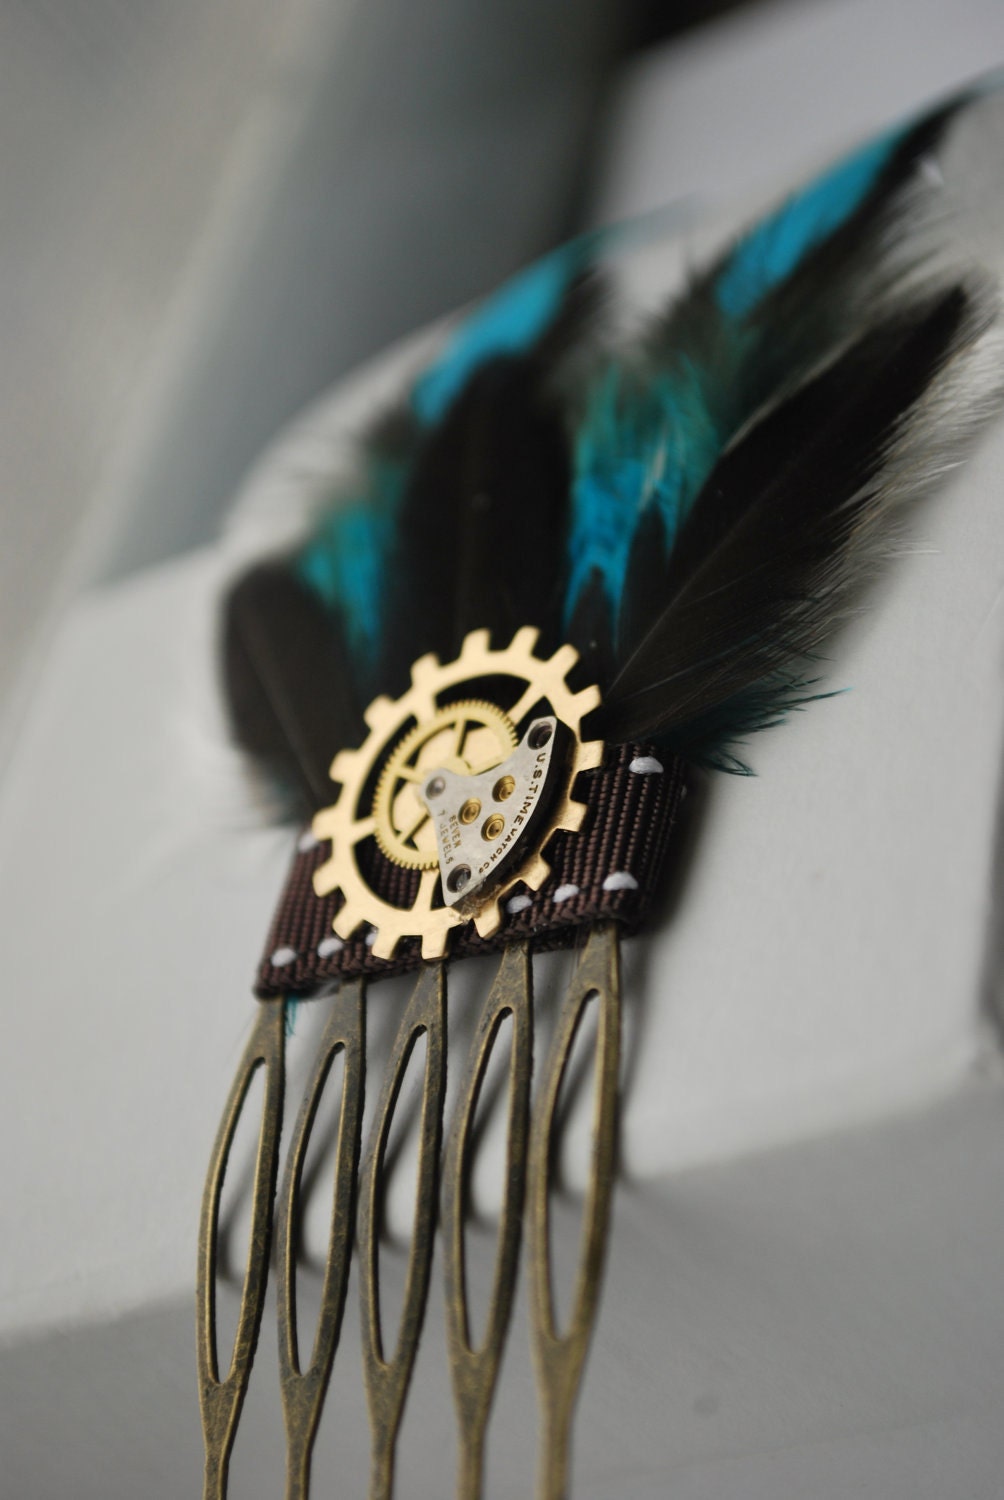 Steampunk Hair Accessory - One Of A Kind Feathered Hair Accessorie With Watch Parts and Gears - Wedding, Bridal, All Occasion